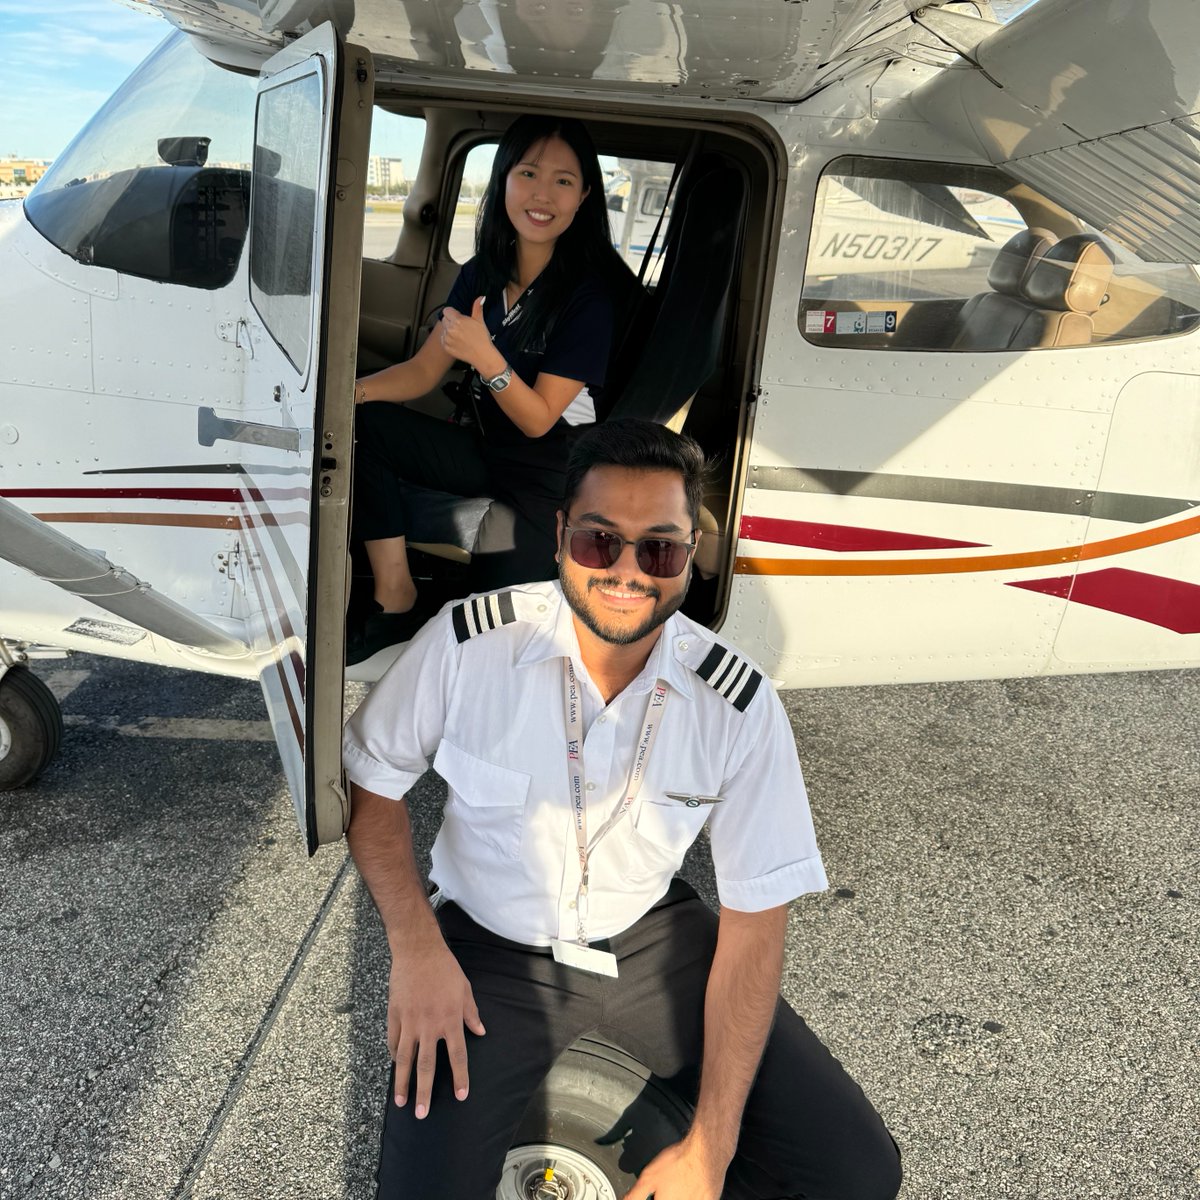 Big congratulations to Aditya! We love helping our student's dreams take flight.

'High fives and blue skies! 🎉✈  Thrilled to share that I've officially become a Private Pilot. The world is my runway now, and the adventure begins! 😎🌍 #PrivatePilot #LivingTheDream'